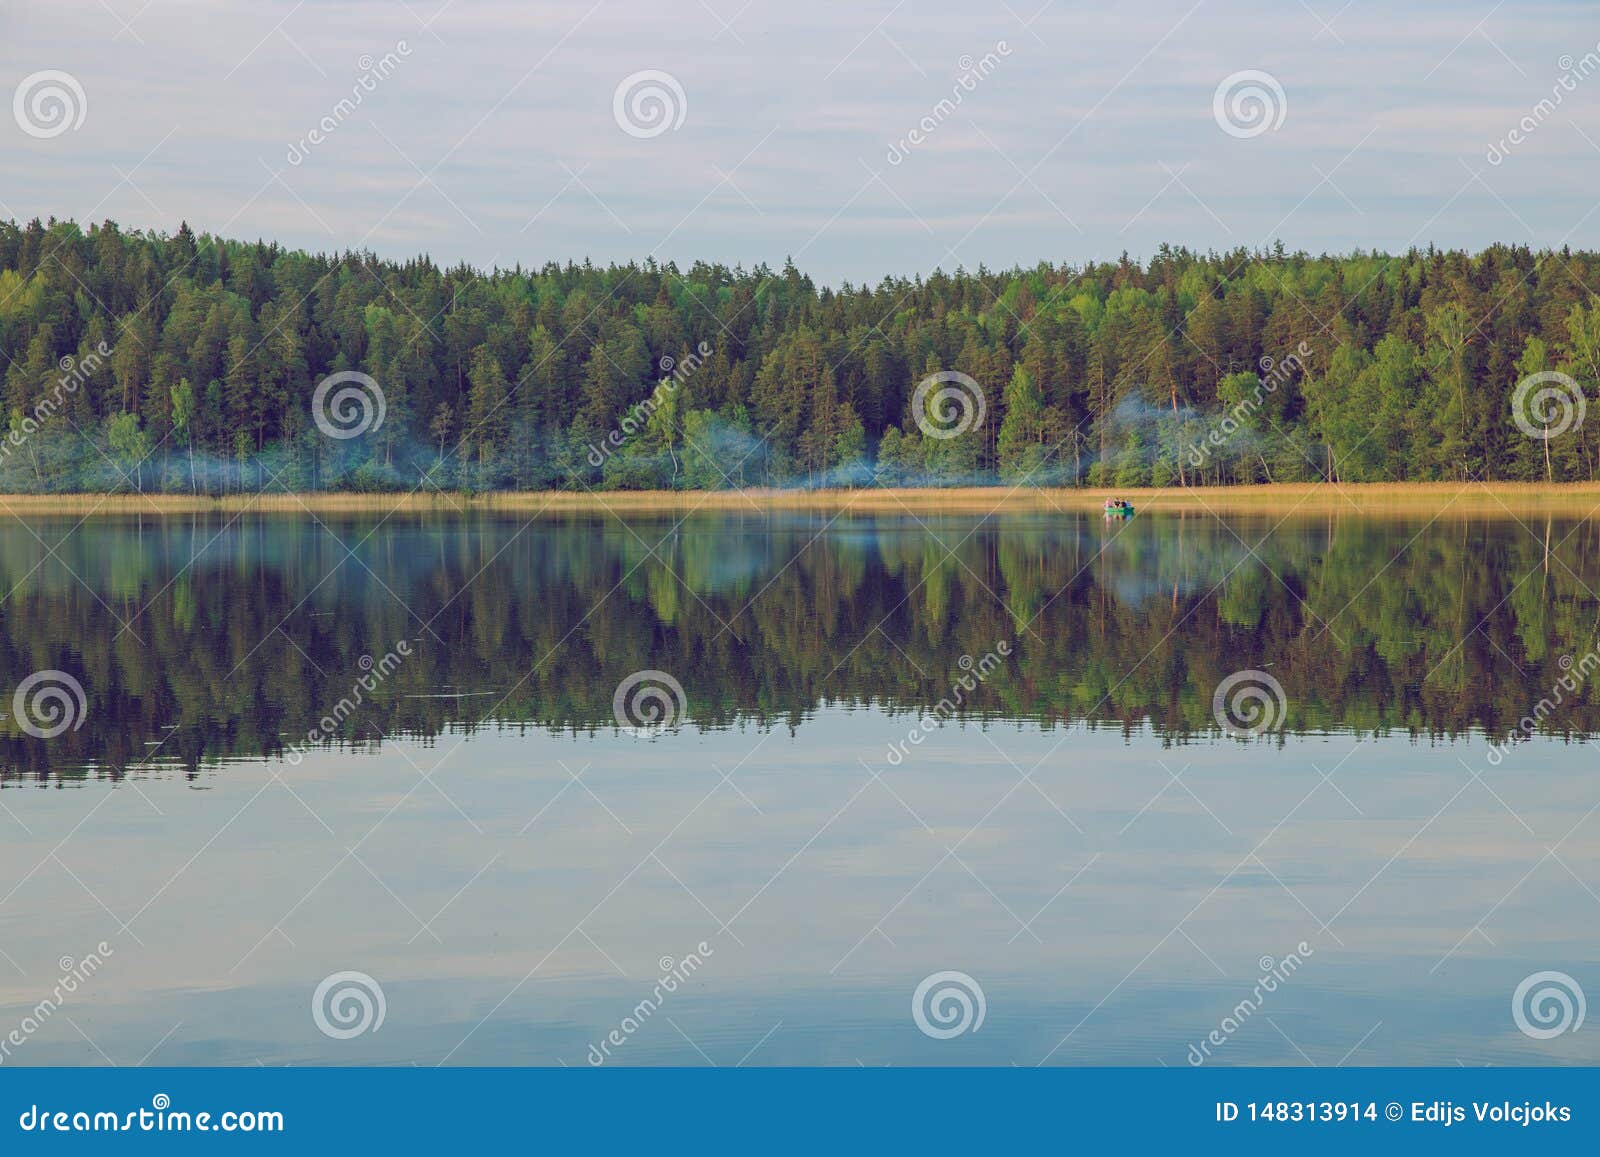 City Raiskums, Latvian Republic. View of the Lake with a Fishing Boat ...